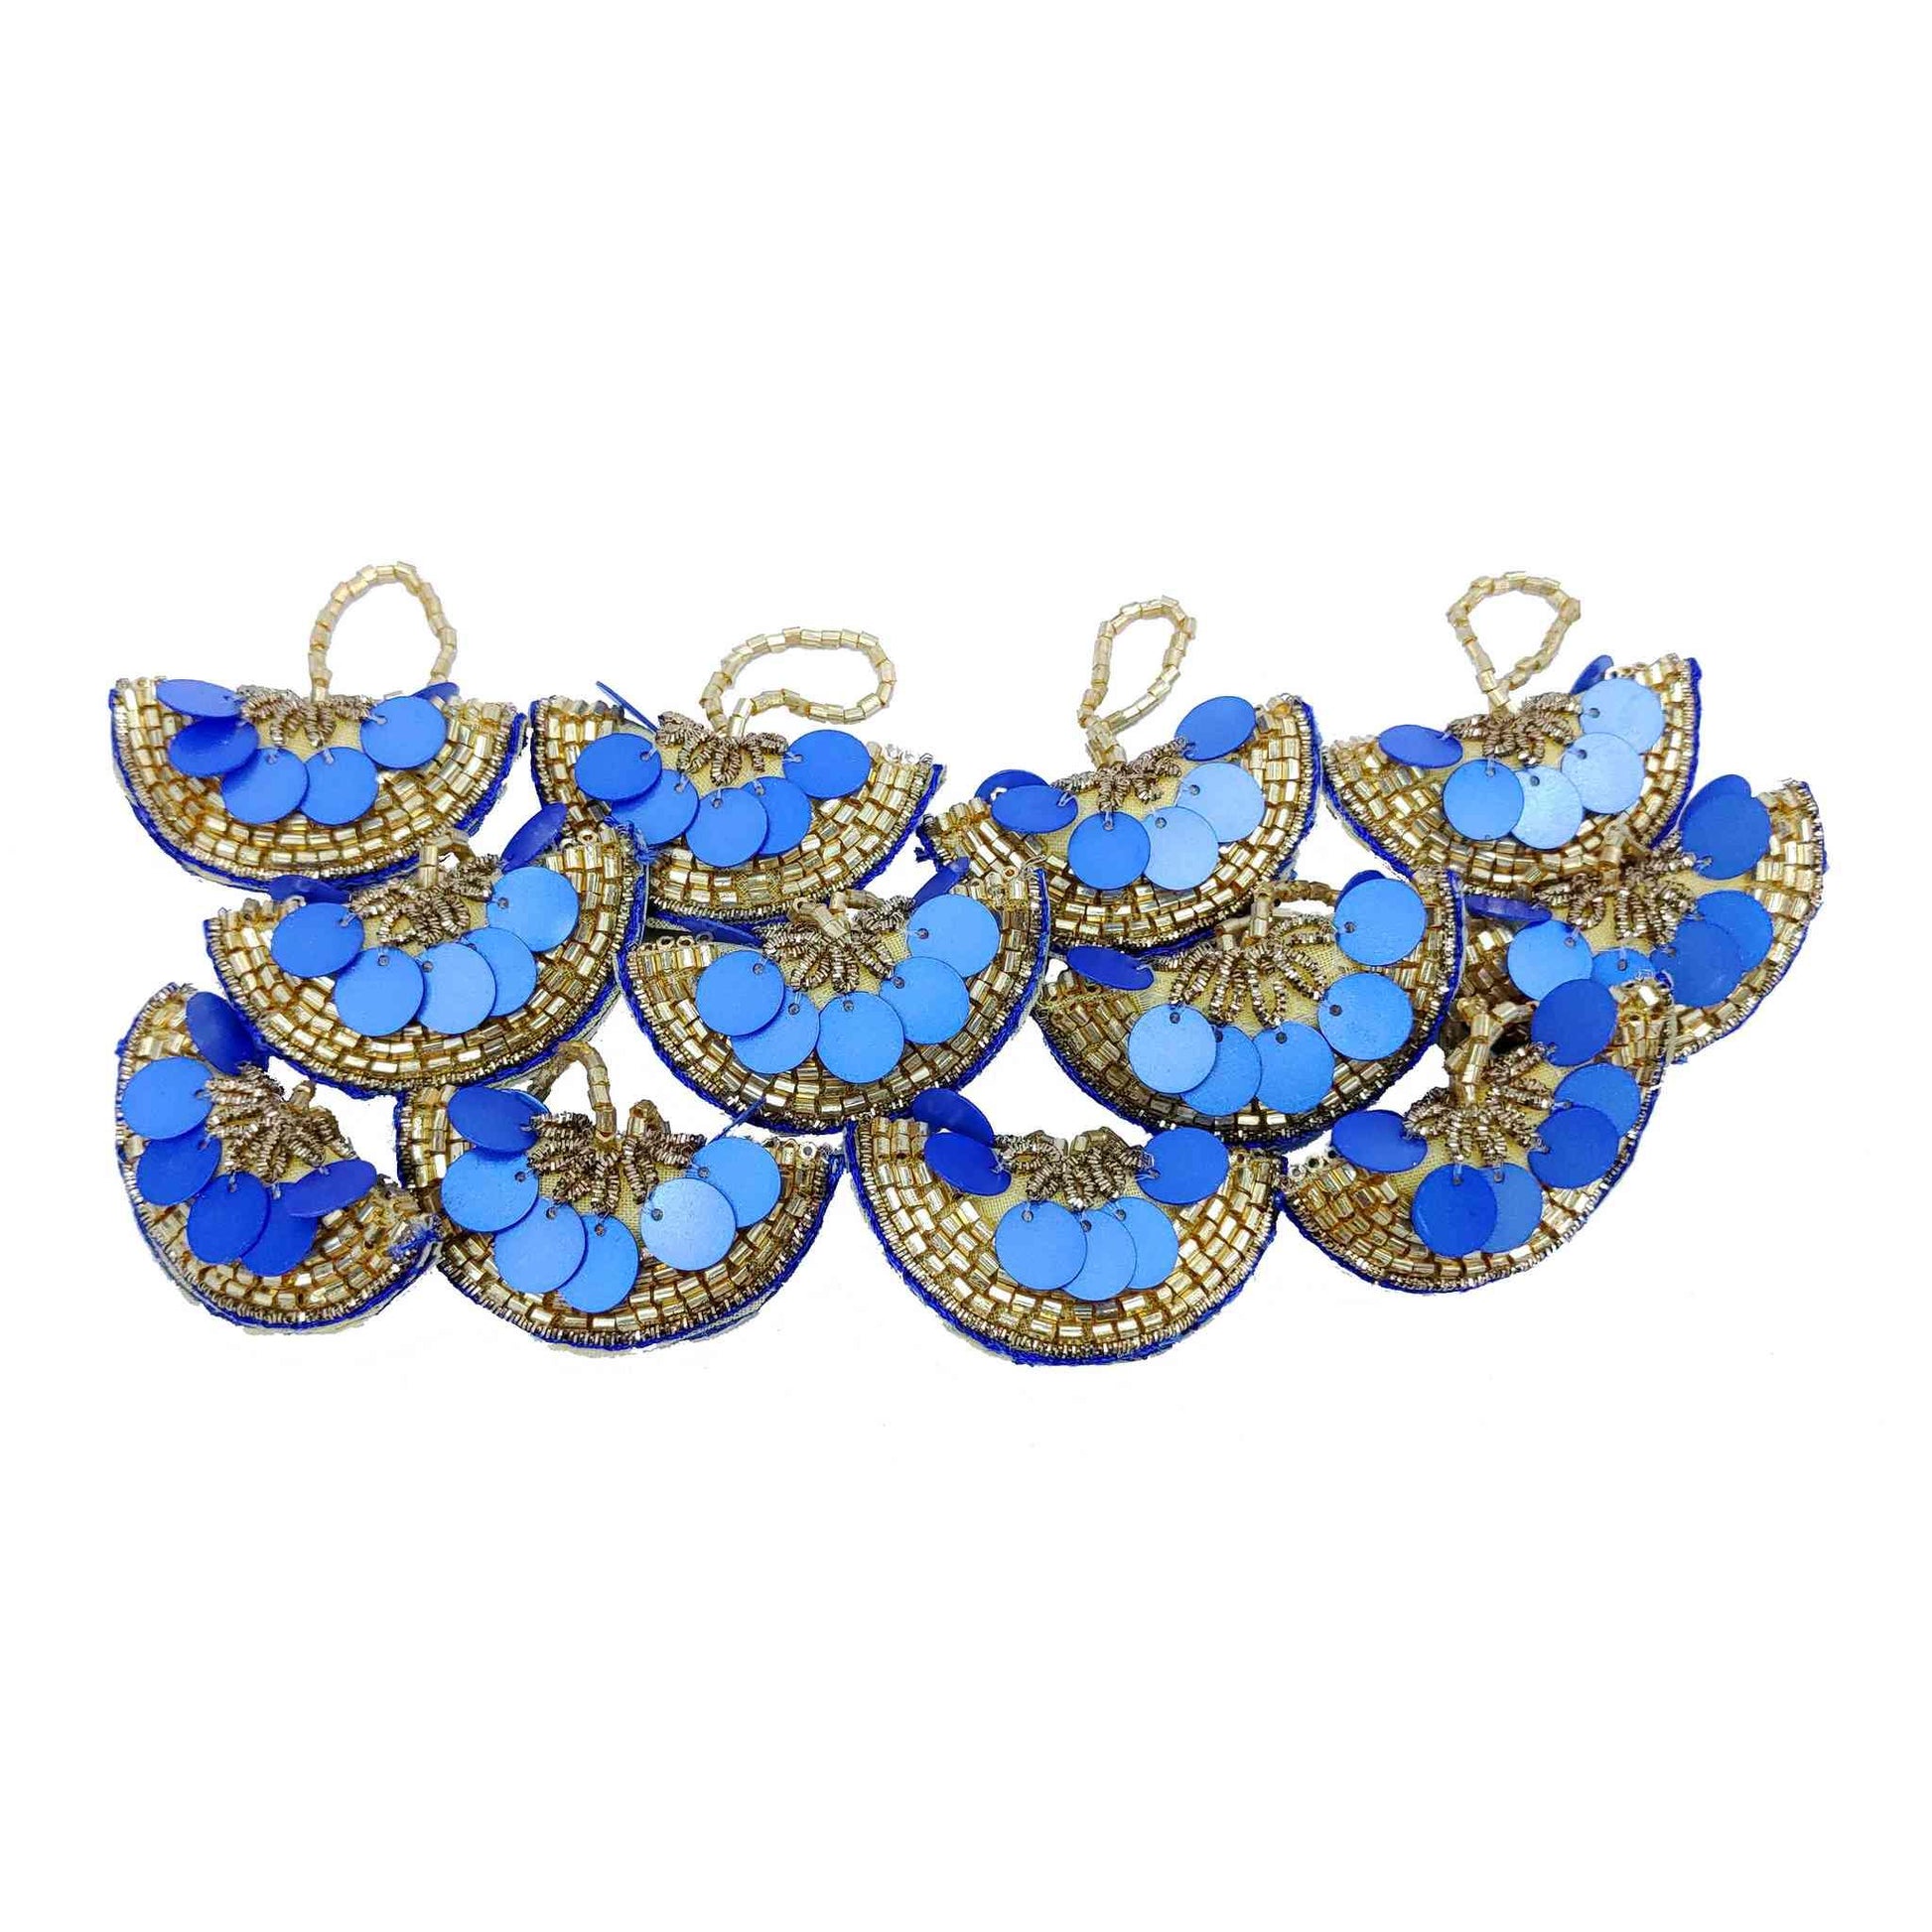 Designer Sequence Latkan Buti for DIY Craft, Trouseau Packing or Decoration (Bunch of 12) - Design 201, Blue - Indian Petals